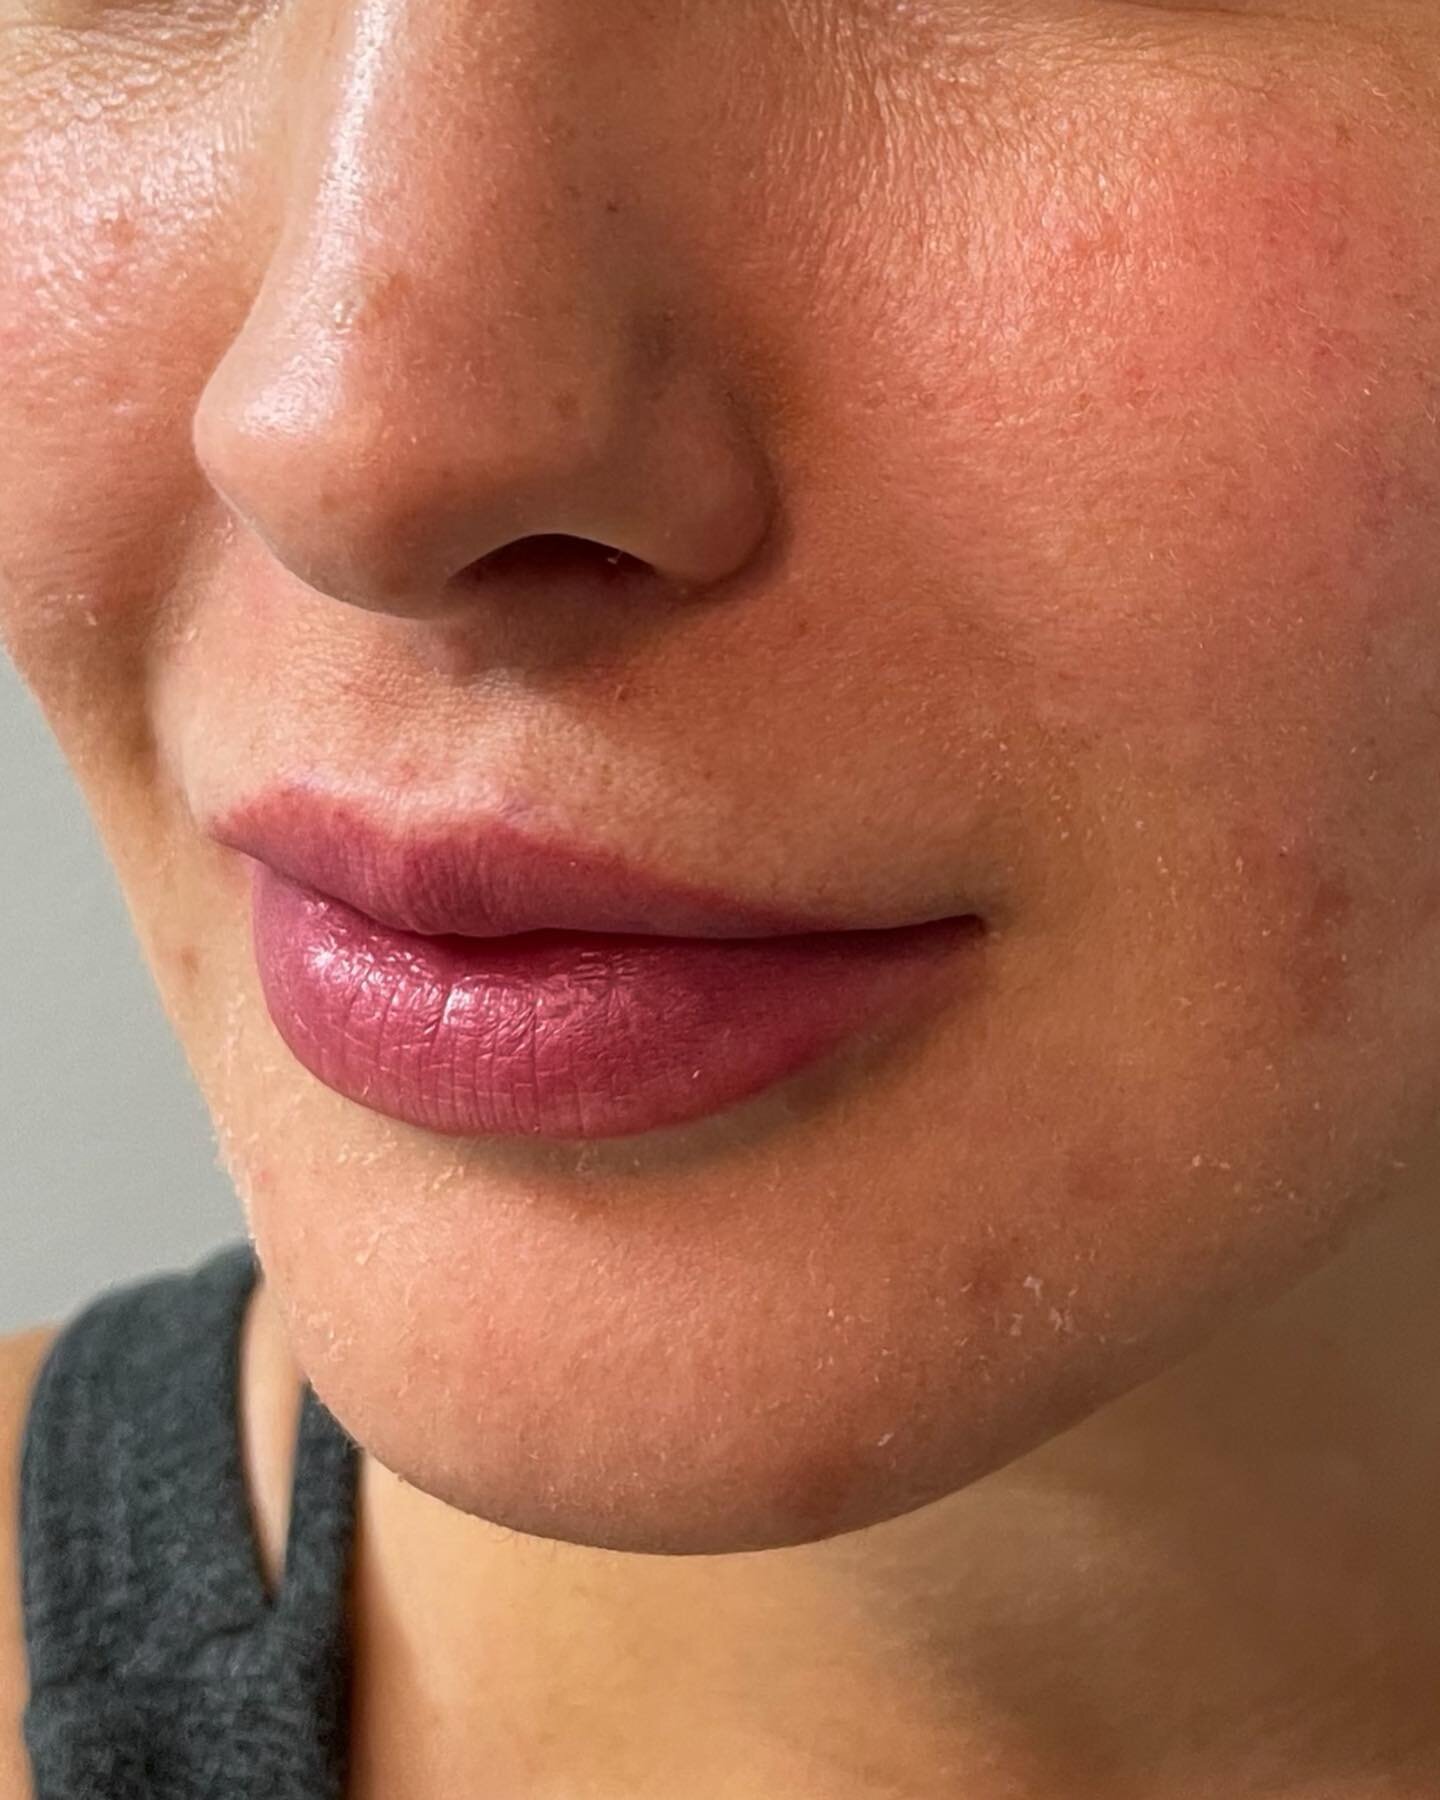 A little lip blush goes a long way ✨

DM to book your appointment today! 

#pmuartist #lipblushing #lipblushtattoo #atlantapmu #cosmetictattooing #cosmetictattooartist #lips #makeupartist #alpharettamakeupartist #liptattoo #permanentmakeup